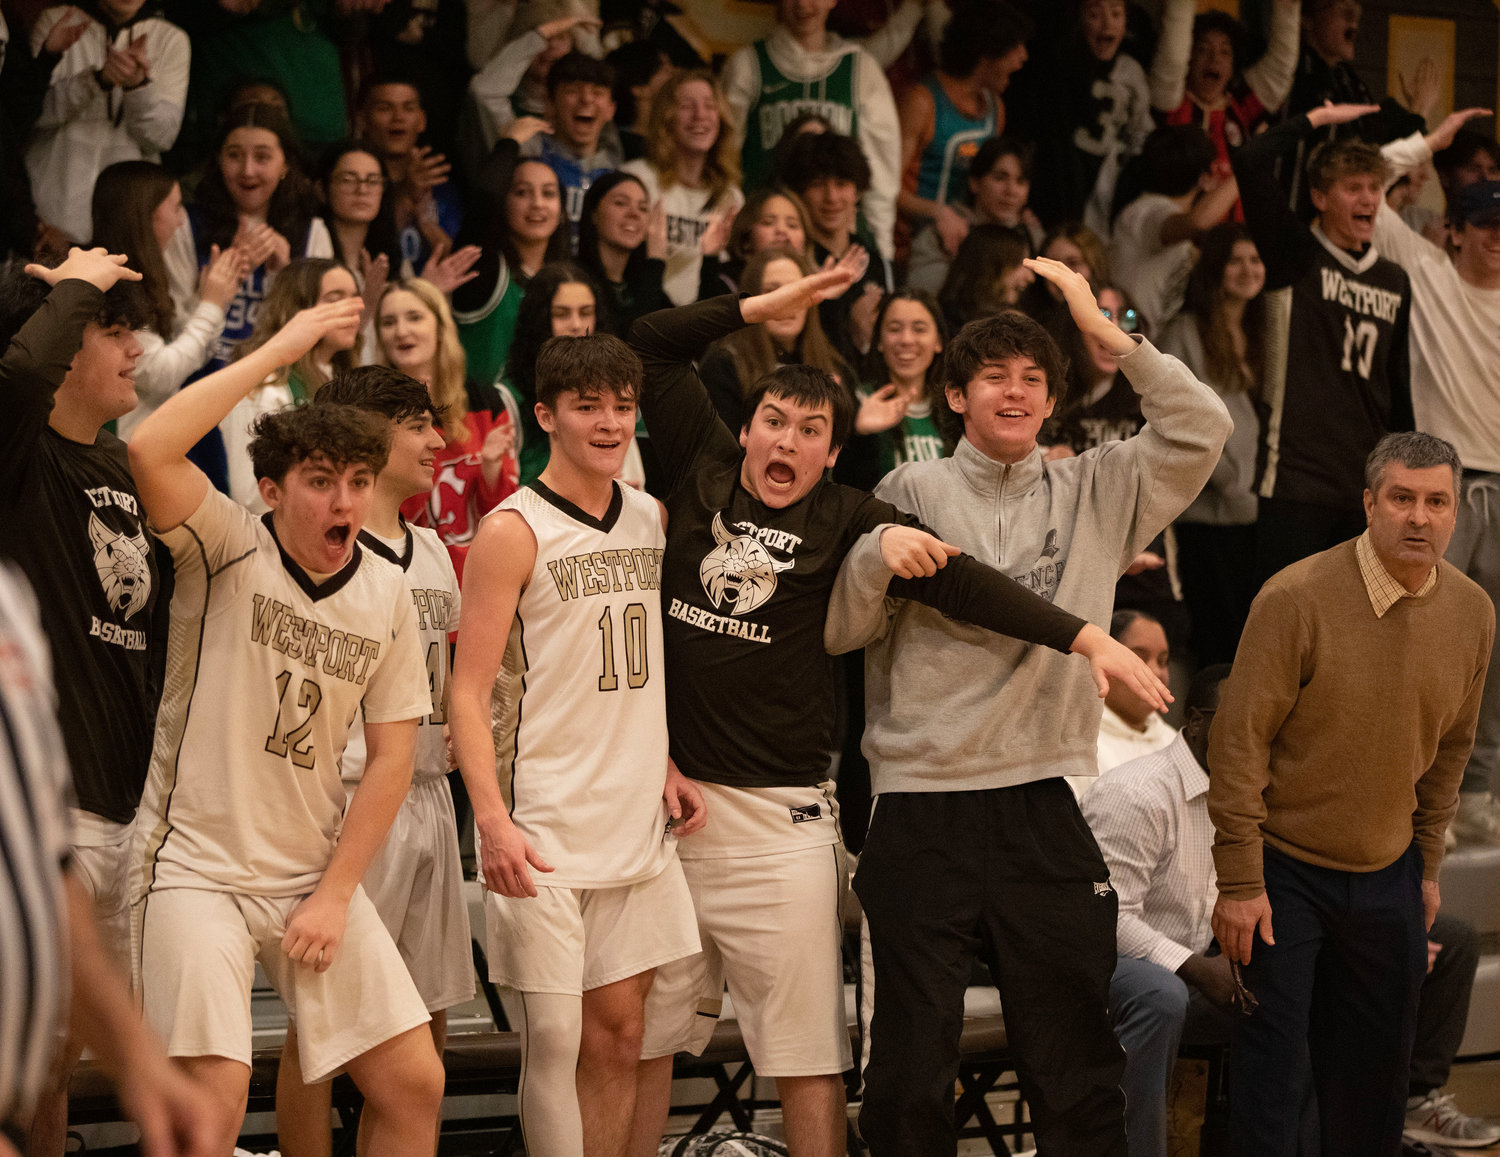 The Wildcats bench ignites after Hunter Brodeur sinks a basket to give Westport a 55-54 lead late in the fourth quarter.